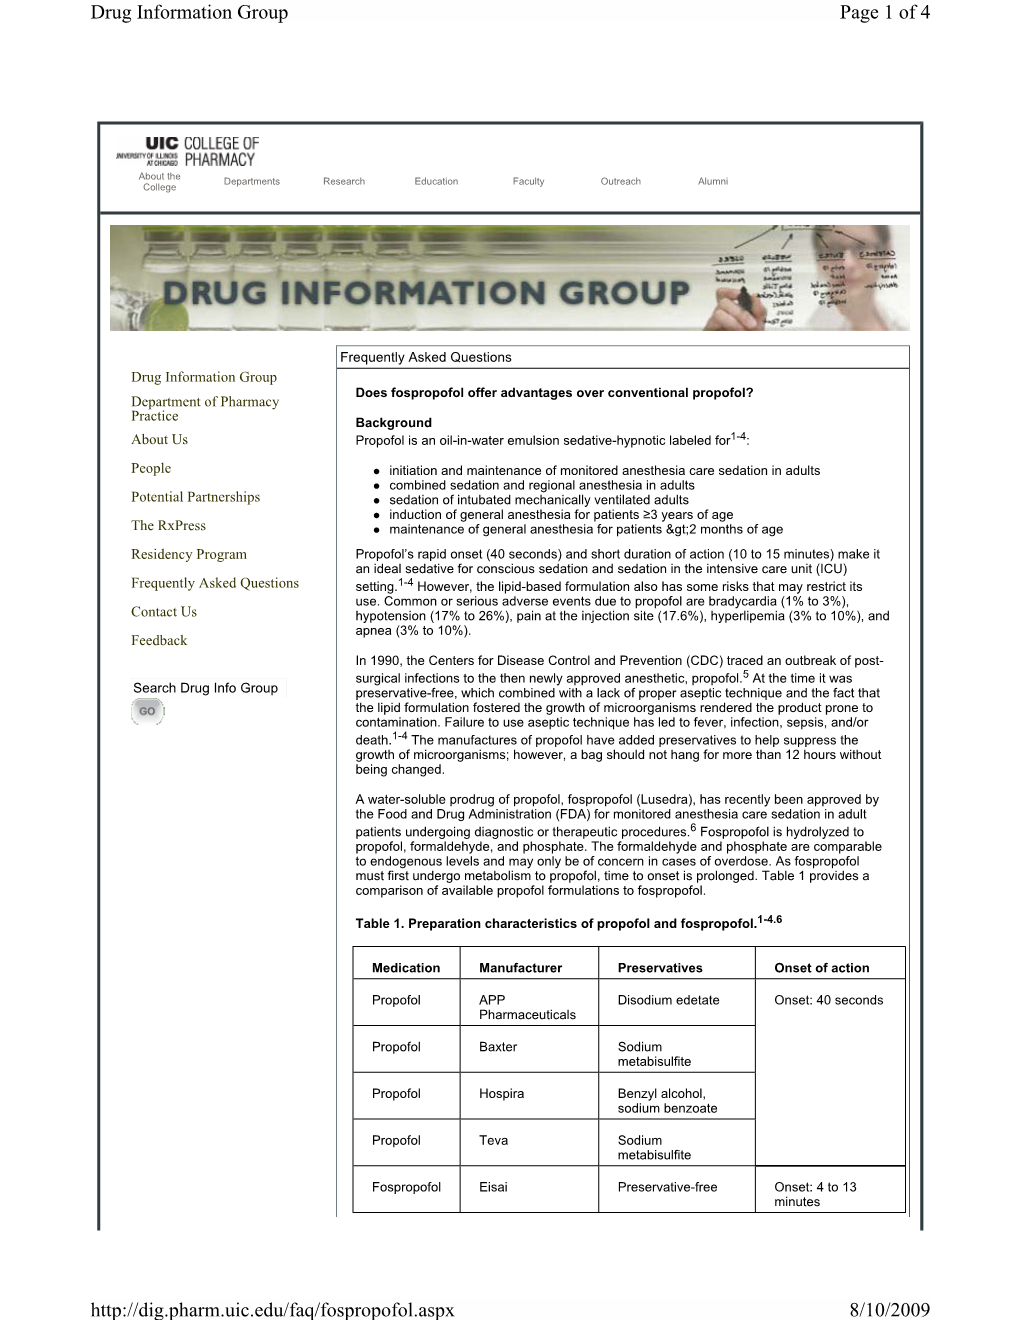 Page 1 of 4 Drug Information Group 8/10/2009